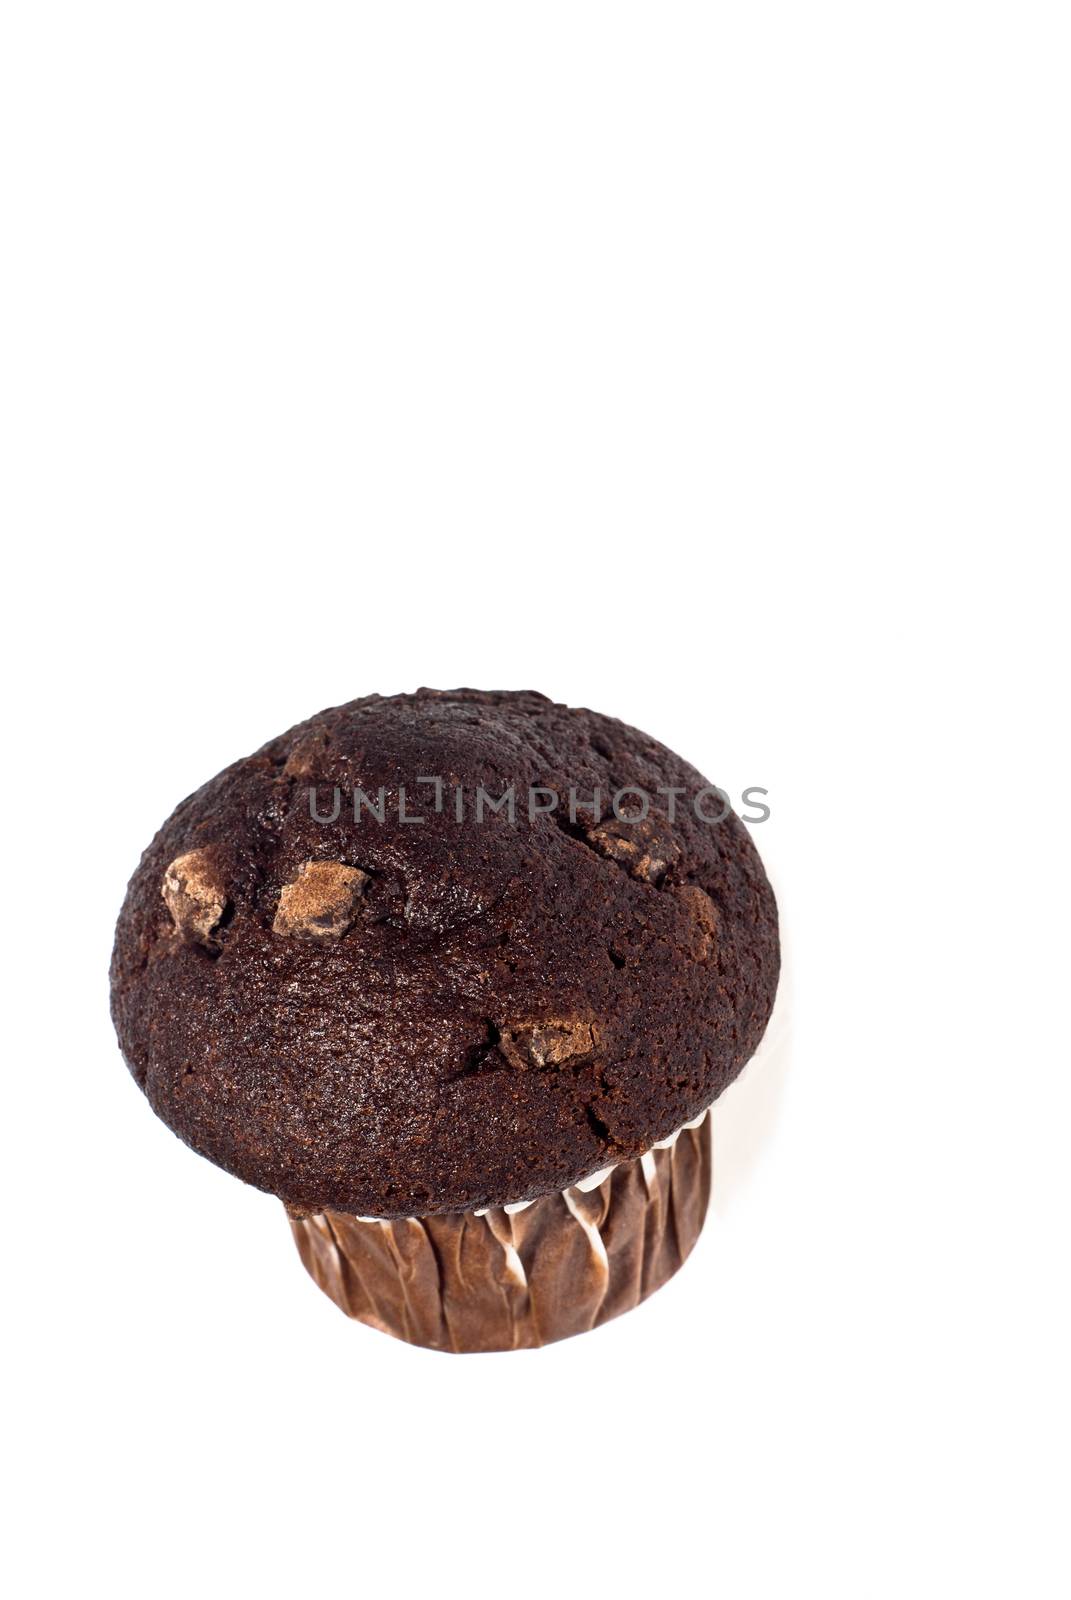 Close up of a fresh baked chocolate muffin against a white background